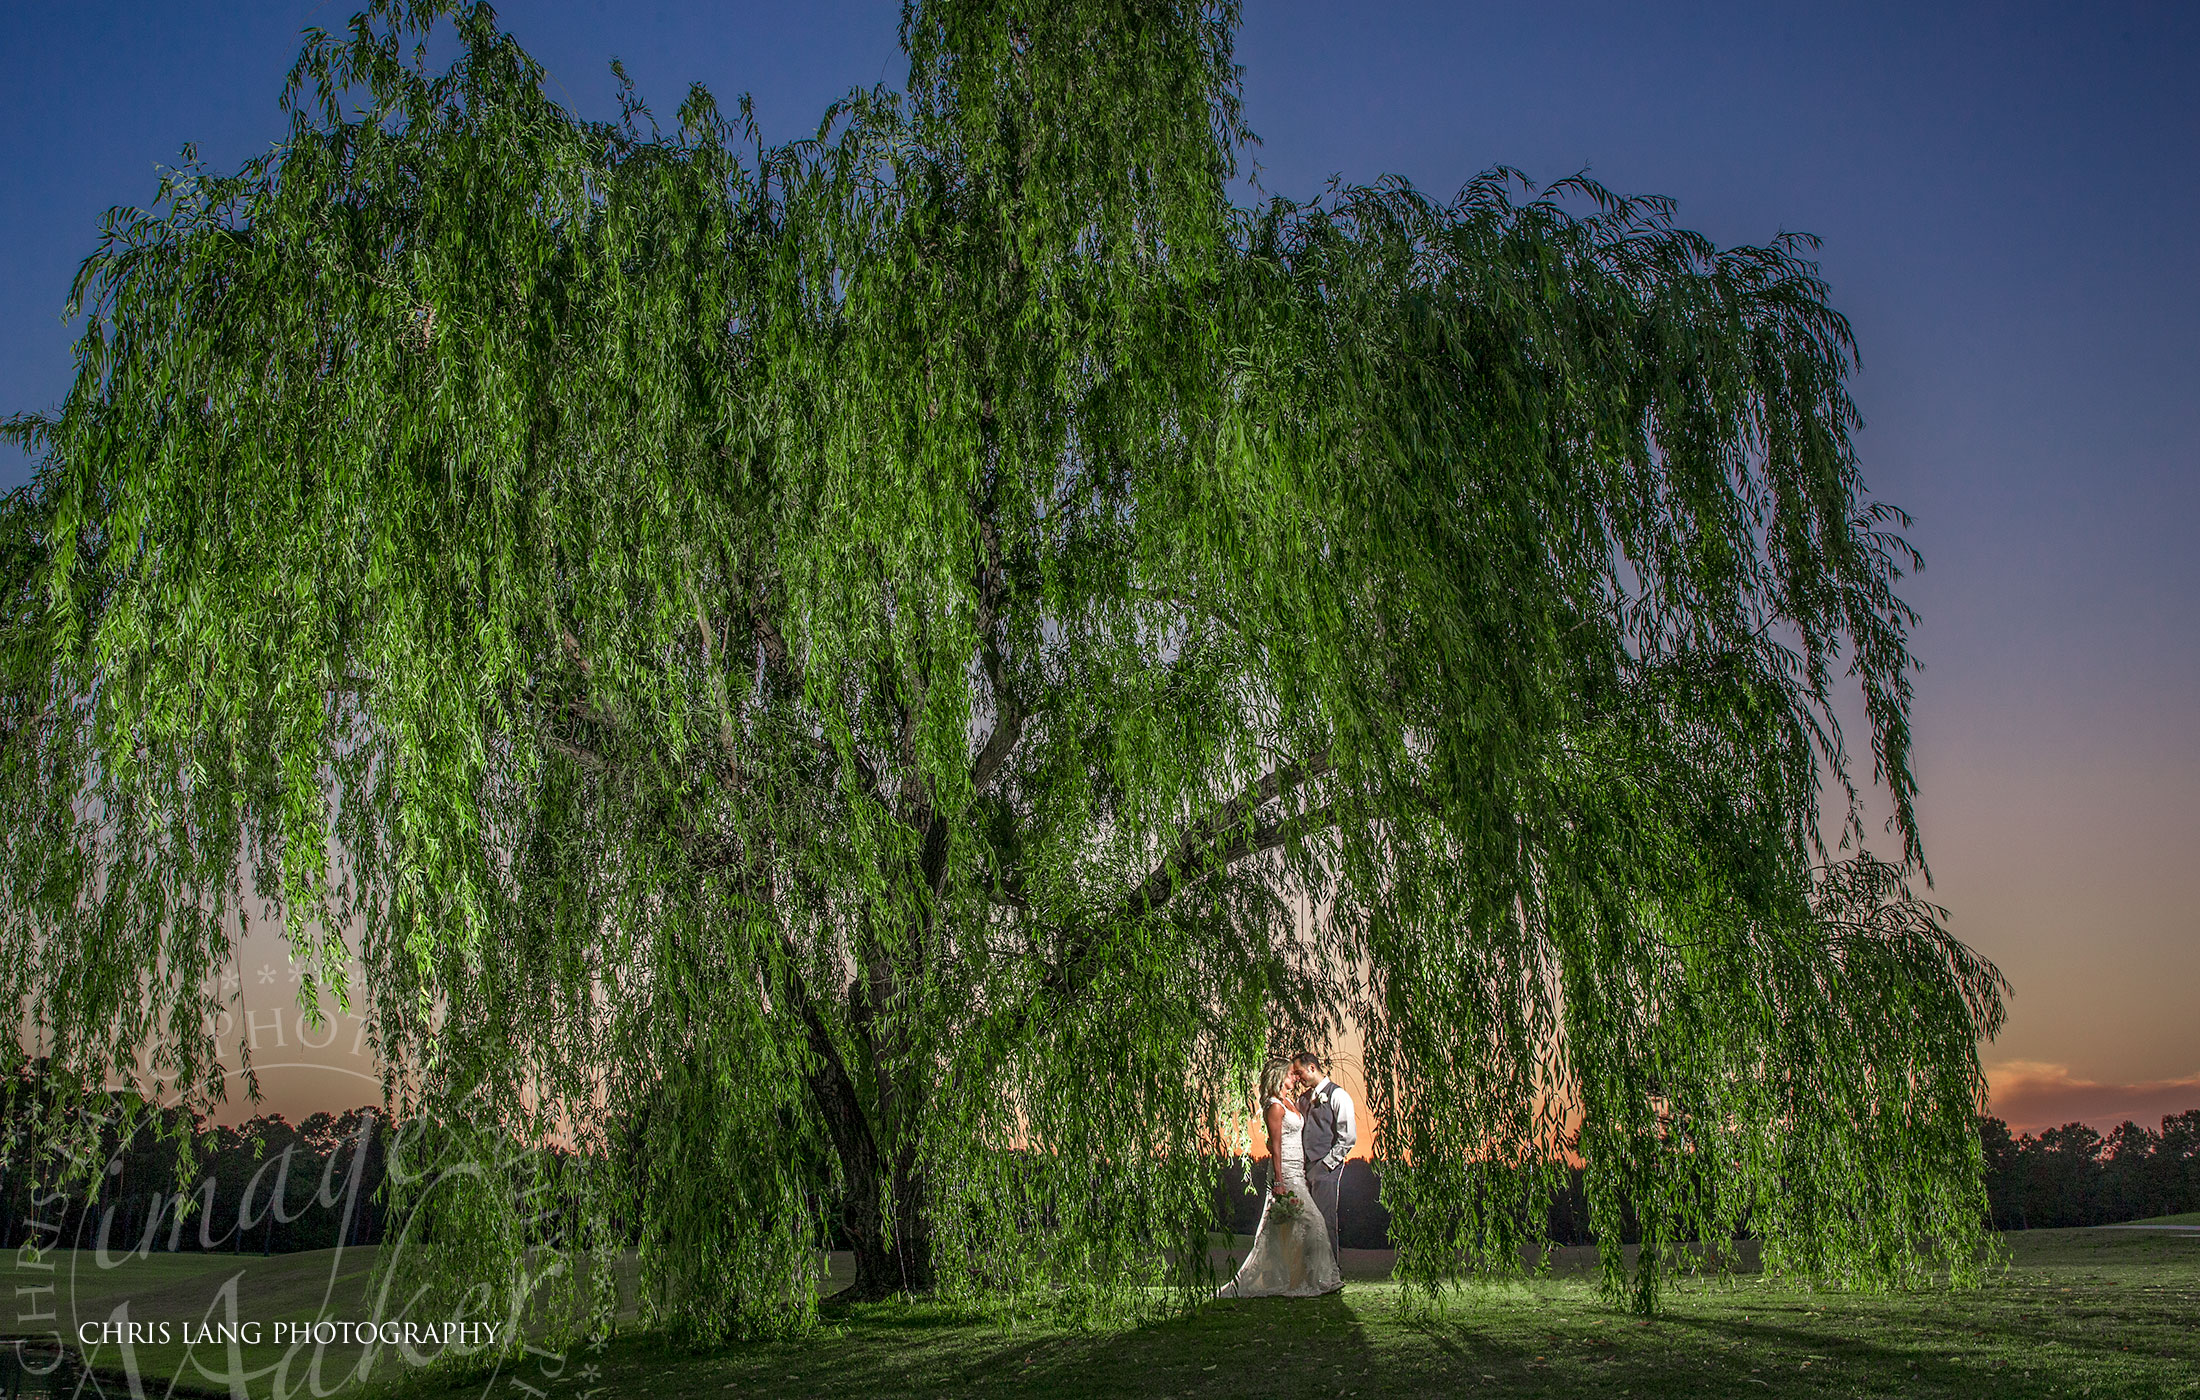 The willow tree at Porters Neck Country Club - Image of bride & groom under the willow tree - Porters Neck Country Club Weddings